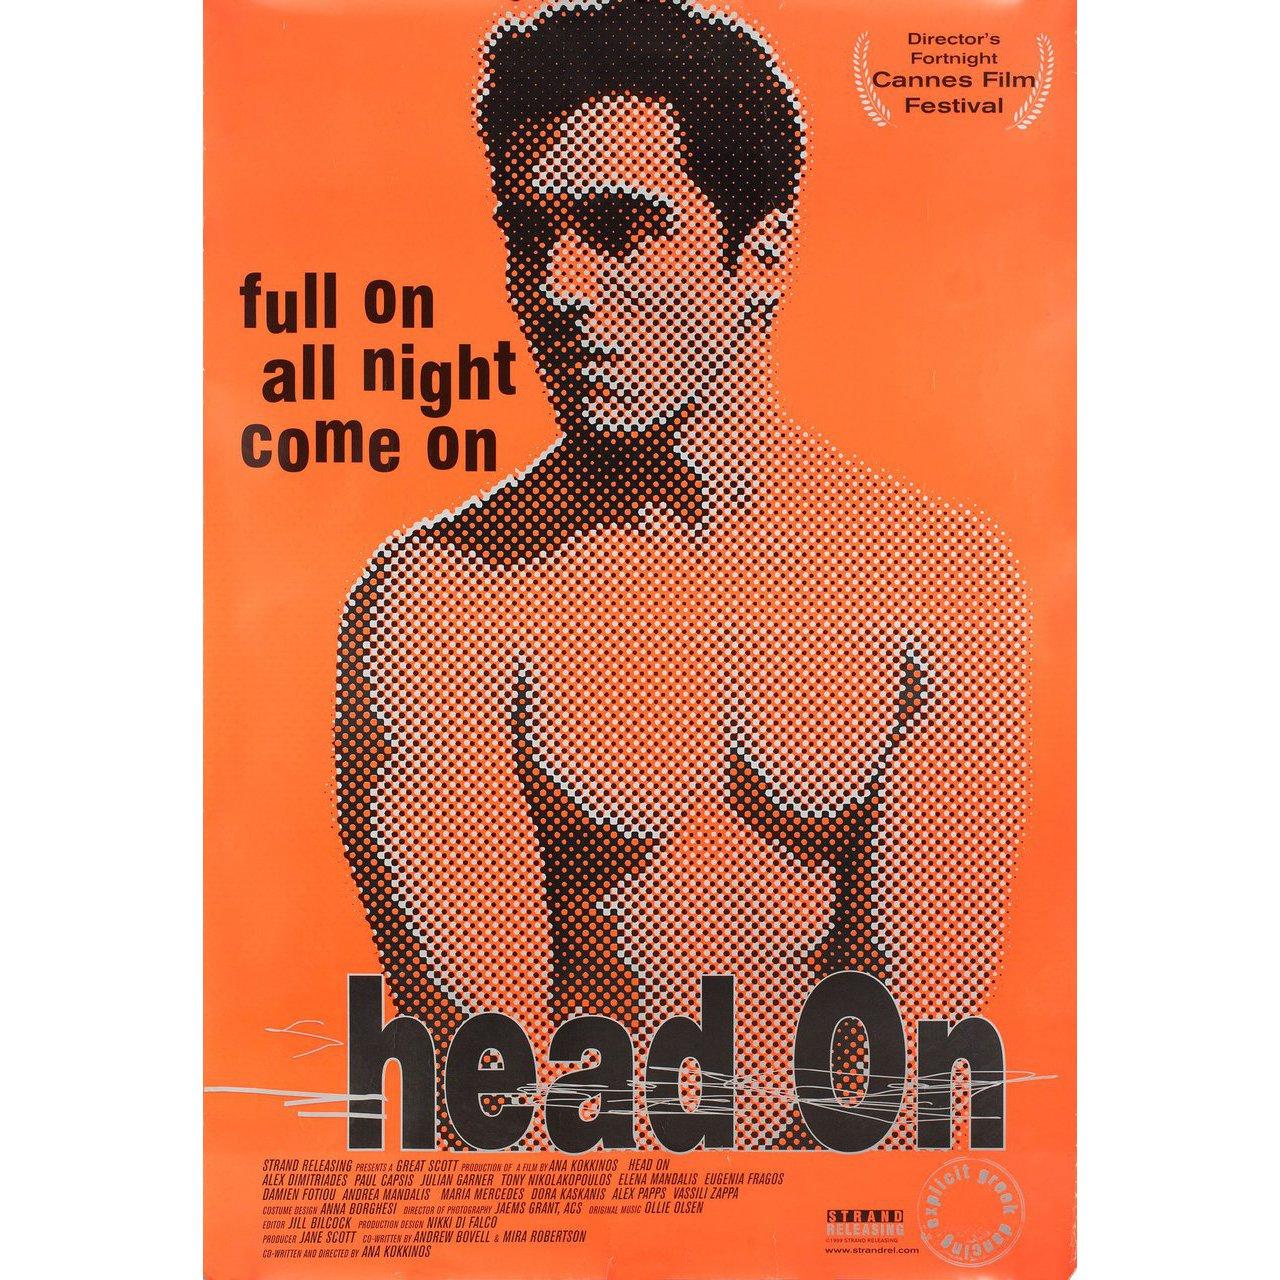 Original 1998 U.S. one sheet poster for the film “Head On” directed by Ana Kokkinos with Alex Dimitriades / Elena Mandalis / Damien Fotiou / Alex Papps. Very good-fine condition, rolled. Please note: the size is stated in inches and the actual size